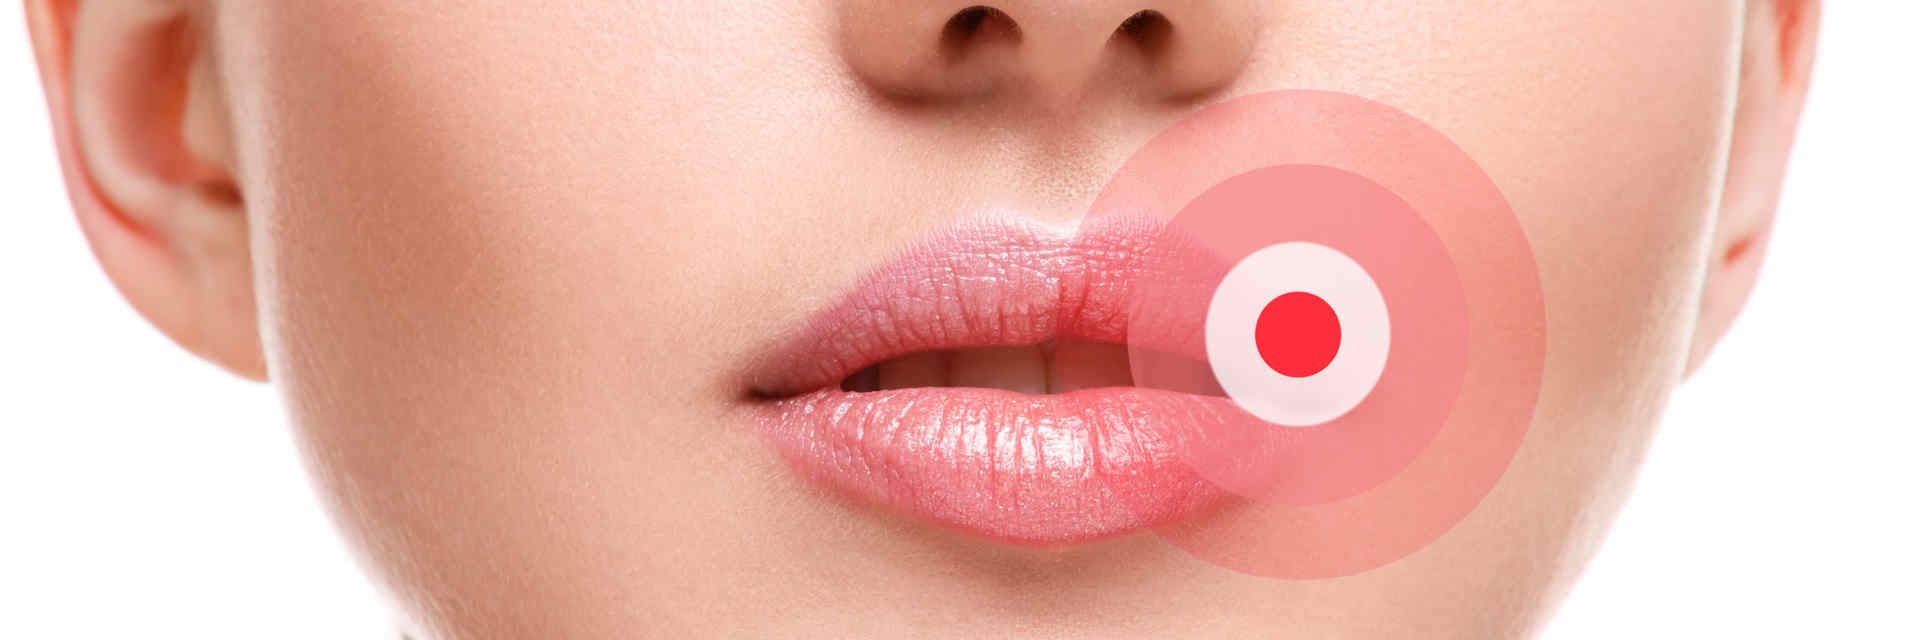 Lips showing where cold sores can appear